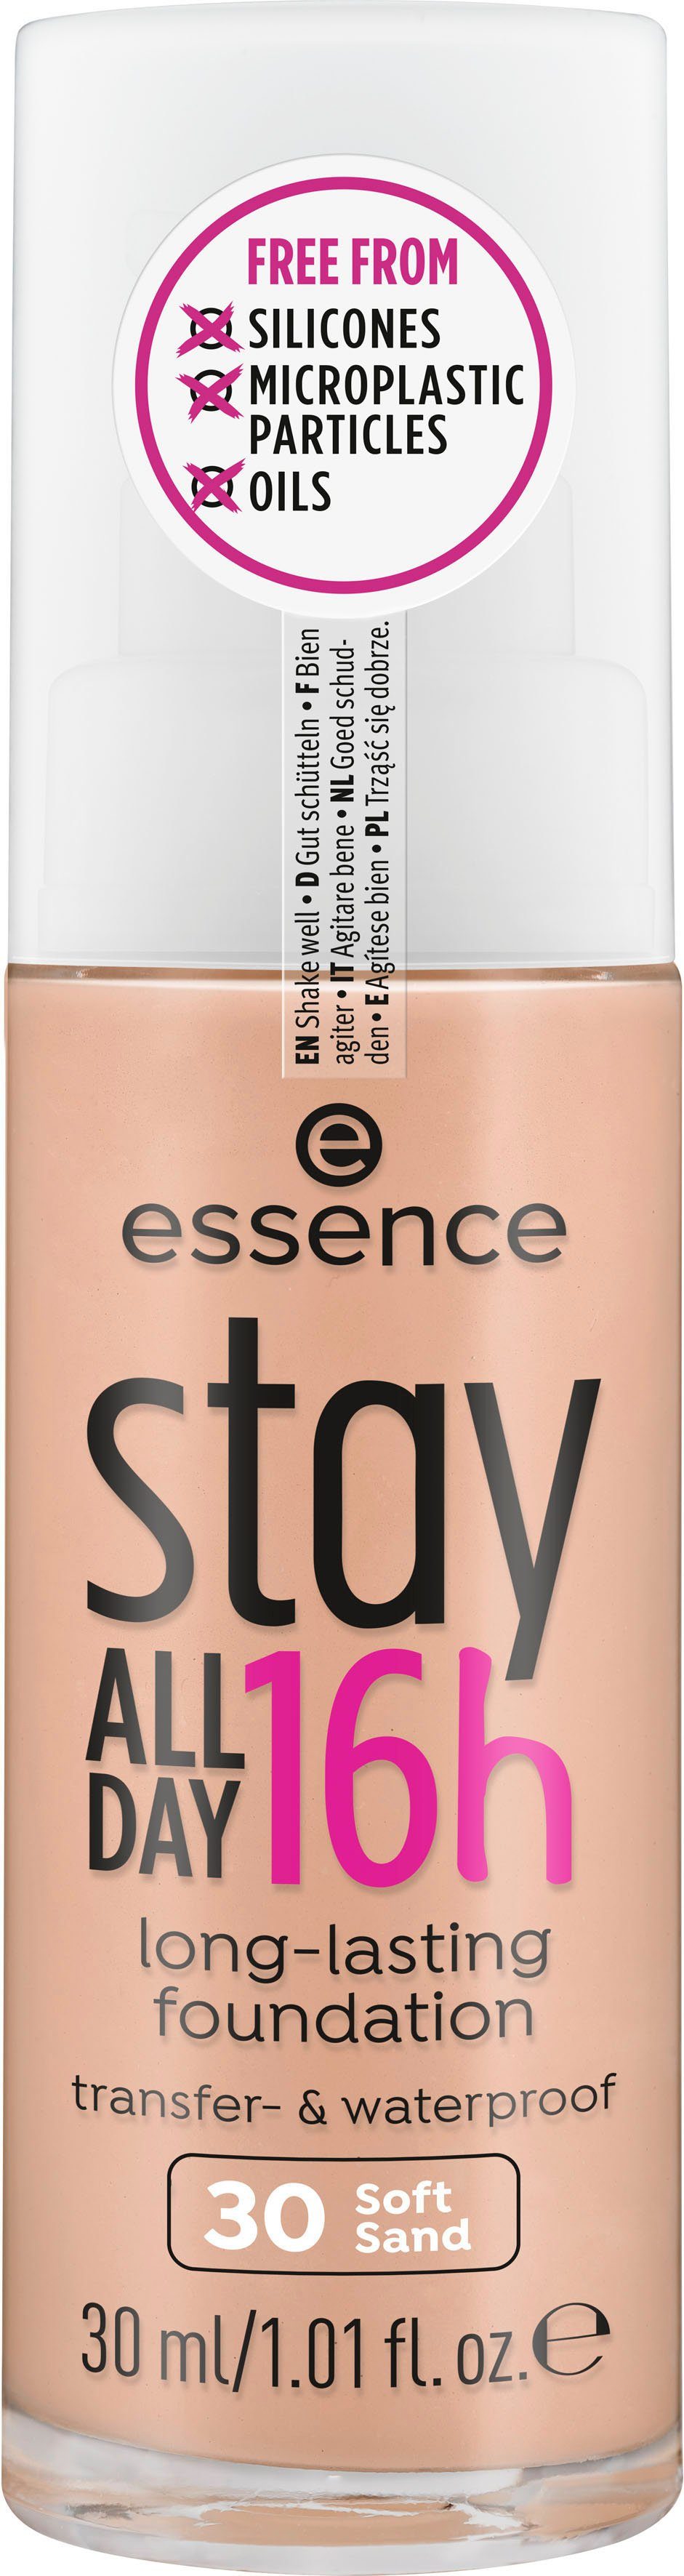 Essence Foundation stay ALL 16h Soft Sand DAY long-lasting, 3-tlg